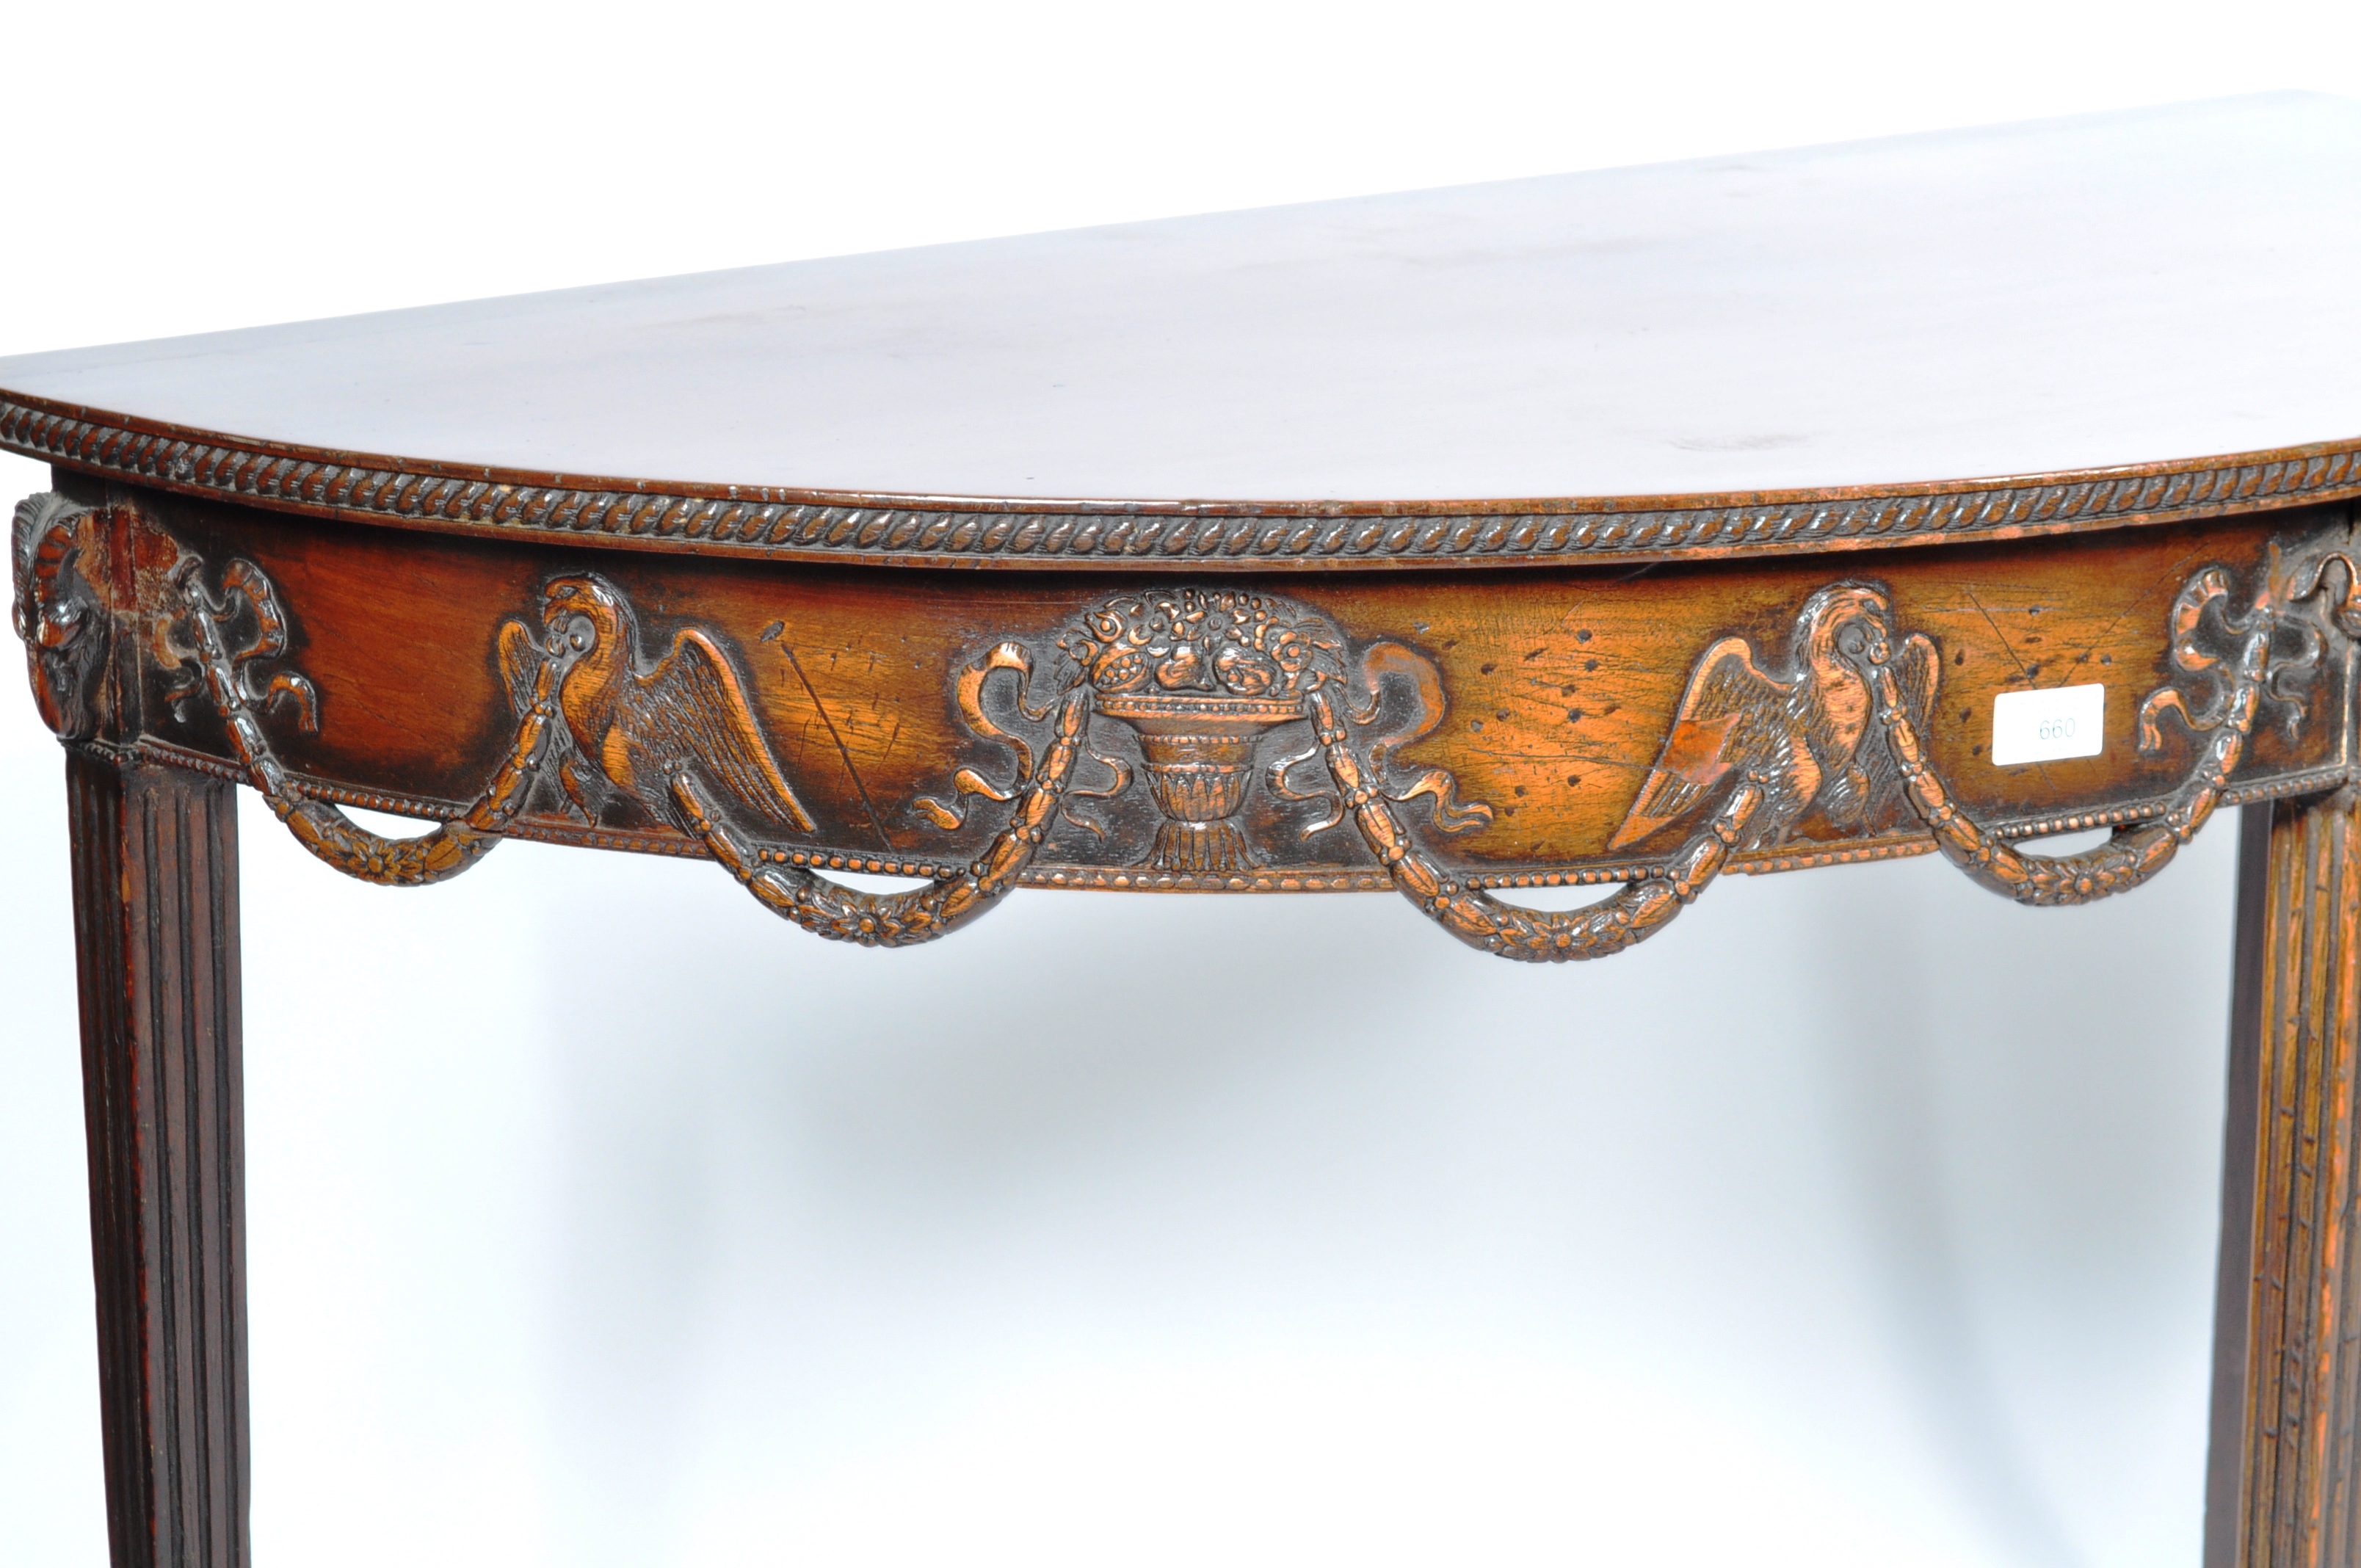 PAIR OF ROBERT ADAM MANNER CONSOLE TABLES - Image 5 of 9